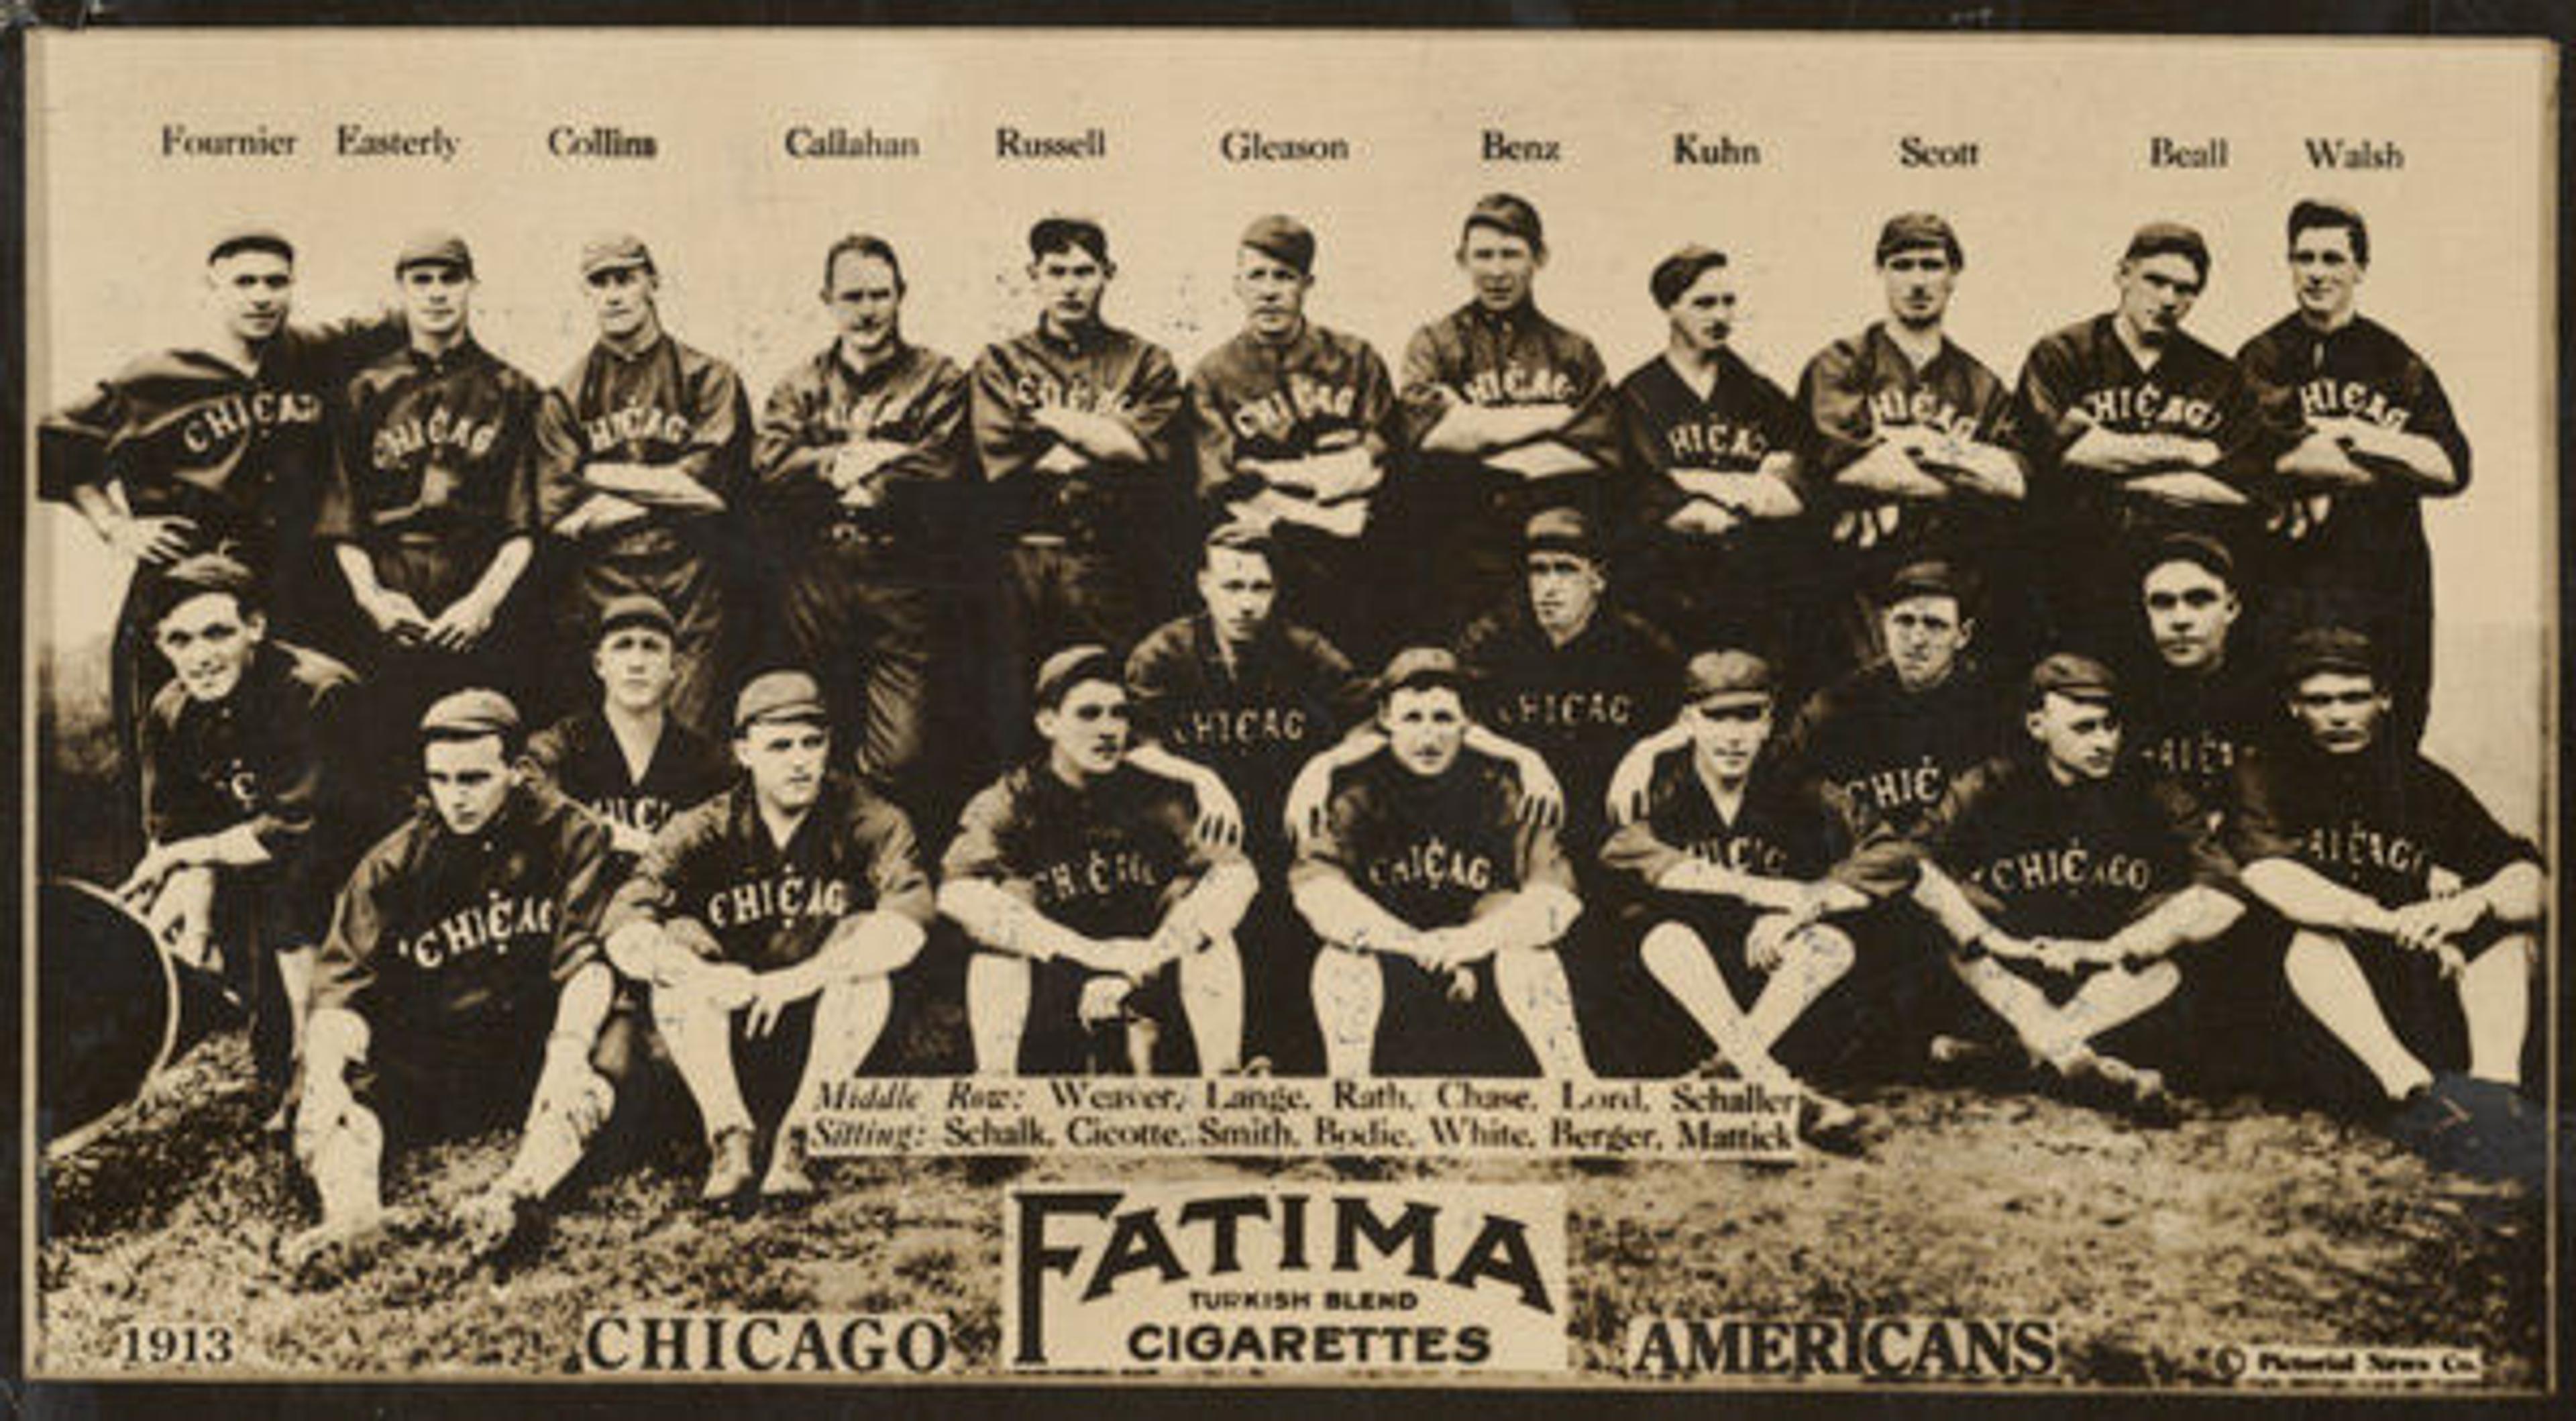 Liggett & Myers Tobacco Company (American, North Carolina). Chicago White Sox, American League, from the Baseball Team series (T200), issued by Liggett & Myers Tobacco Company to promote Fatima Turkish Blend Cigarettes, 1913. Photograph; sheet: 2 11/16 x 4 3/4 in. (6.9 x 12.1 cm). The Metropolitan Museum of Art, New York, The Jefferson R. Burdick Collection, Gift of Jefferson R. Burdick (63.350.246.200.2). Photographic copyright, The Pictorial News Co.